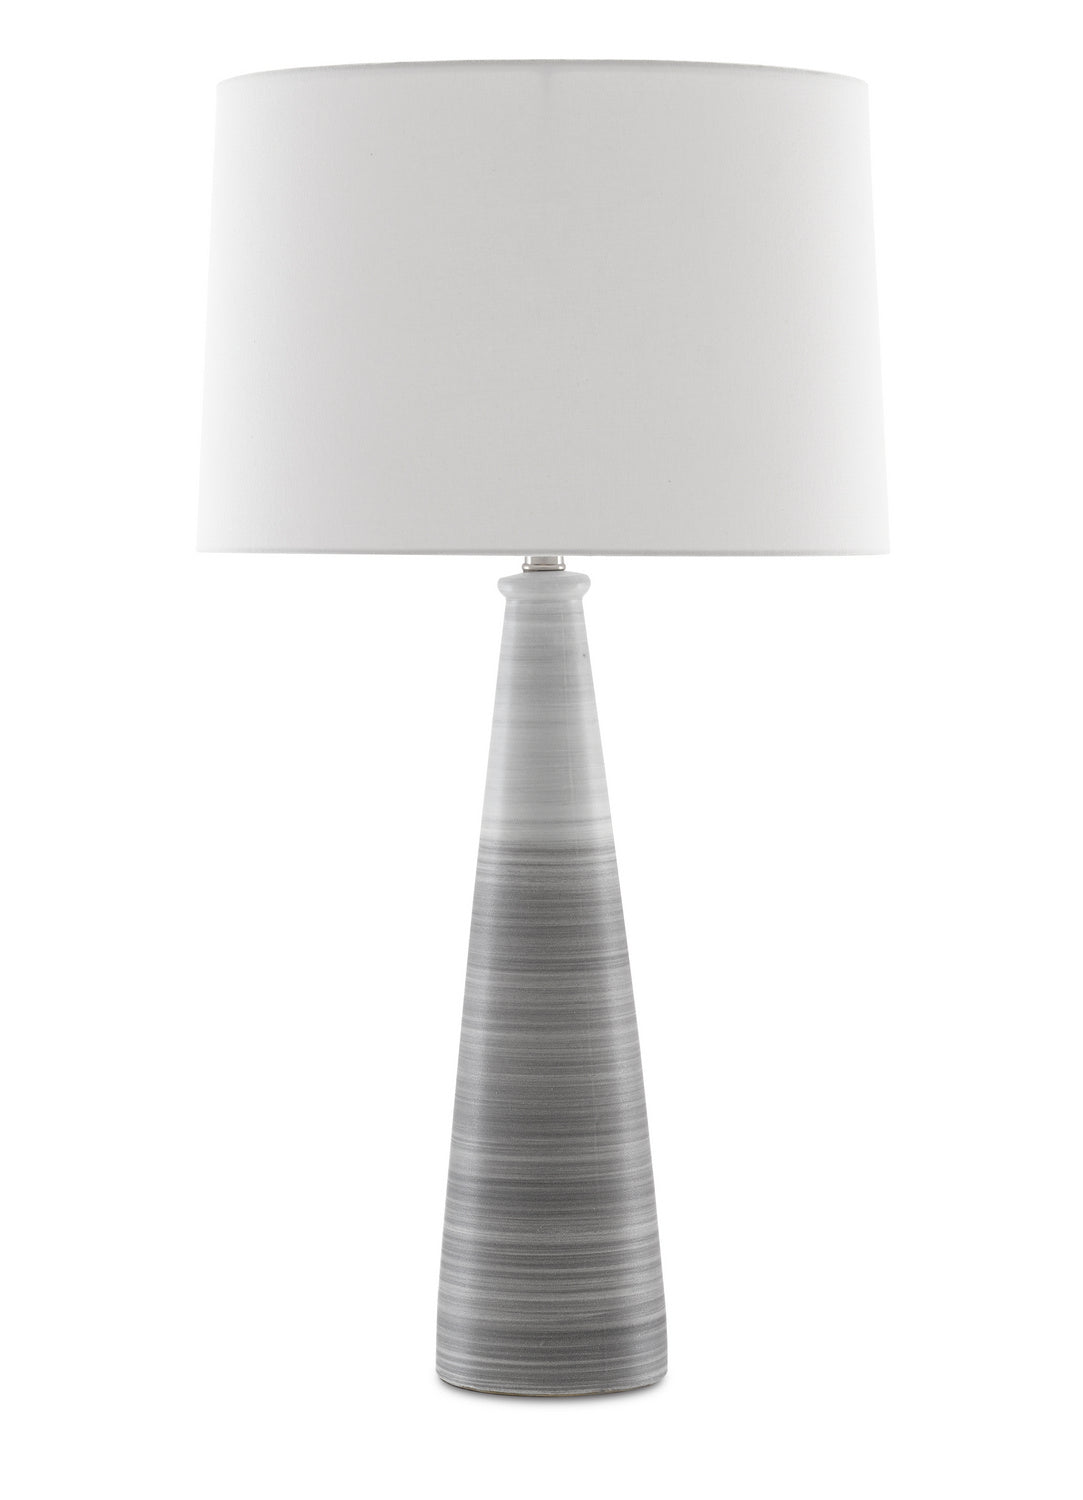 One Light Table Lamp from the Forefront collection in Gray/White finish